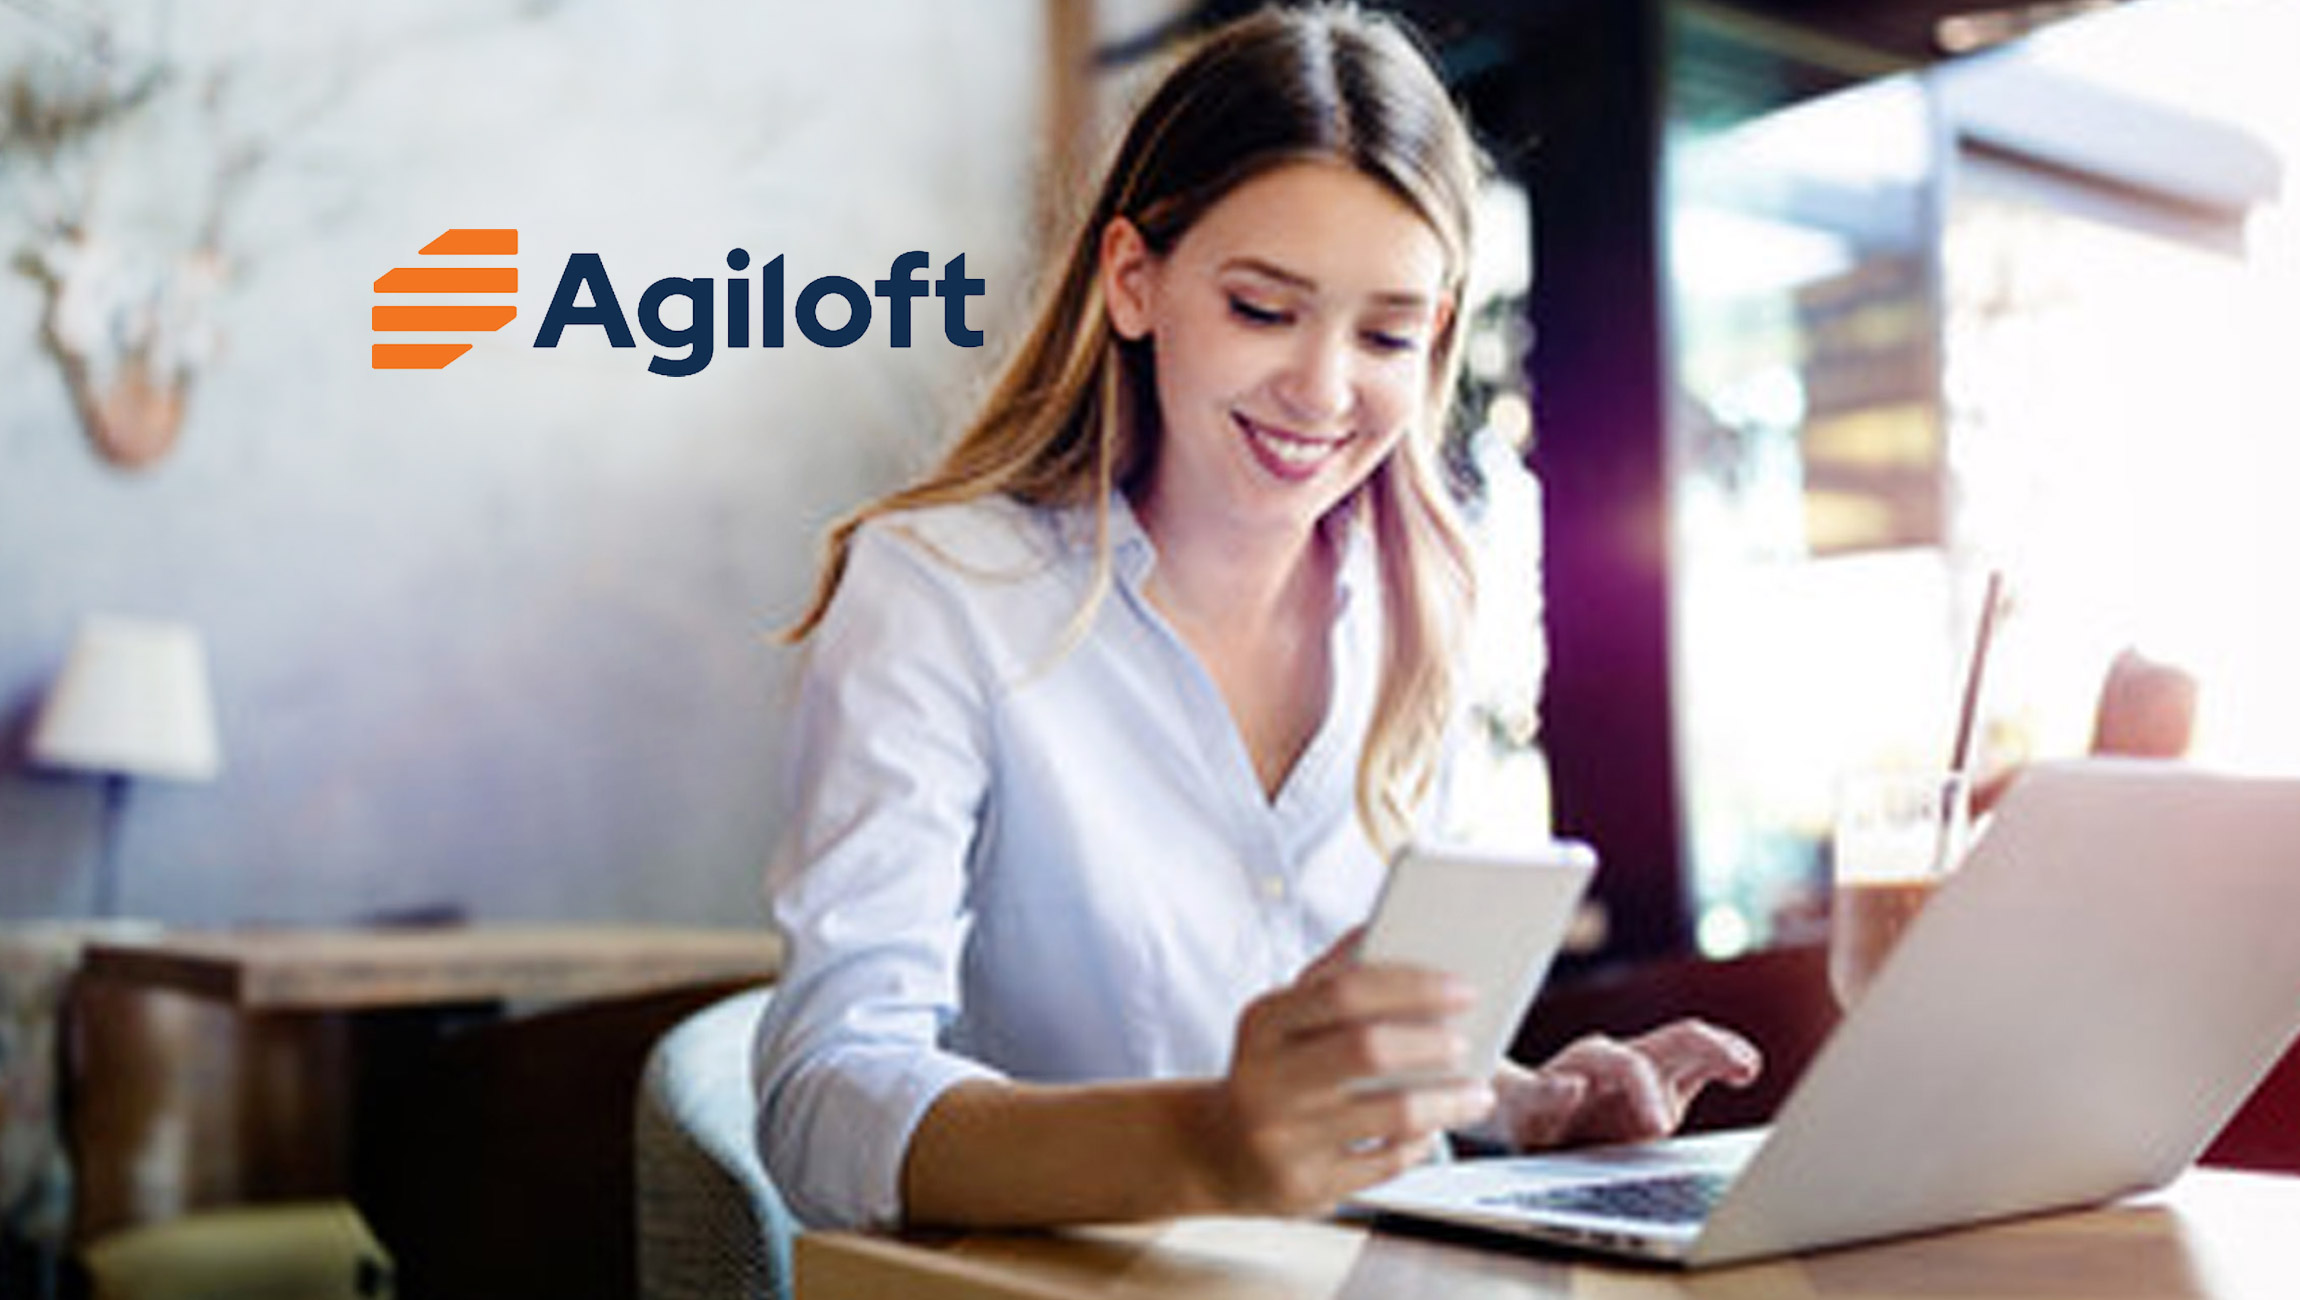 A New Breed of General Counsel with Digital Transformation Skills Wins Top Roles, According to CLM Leader Agiloft's Trends for Contract Management